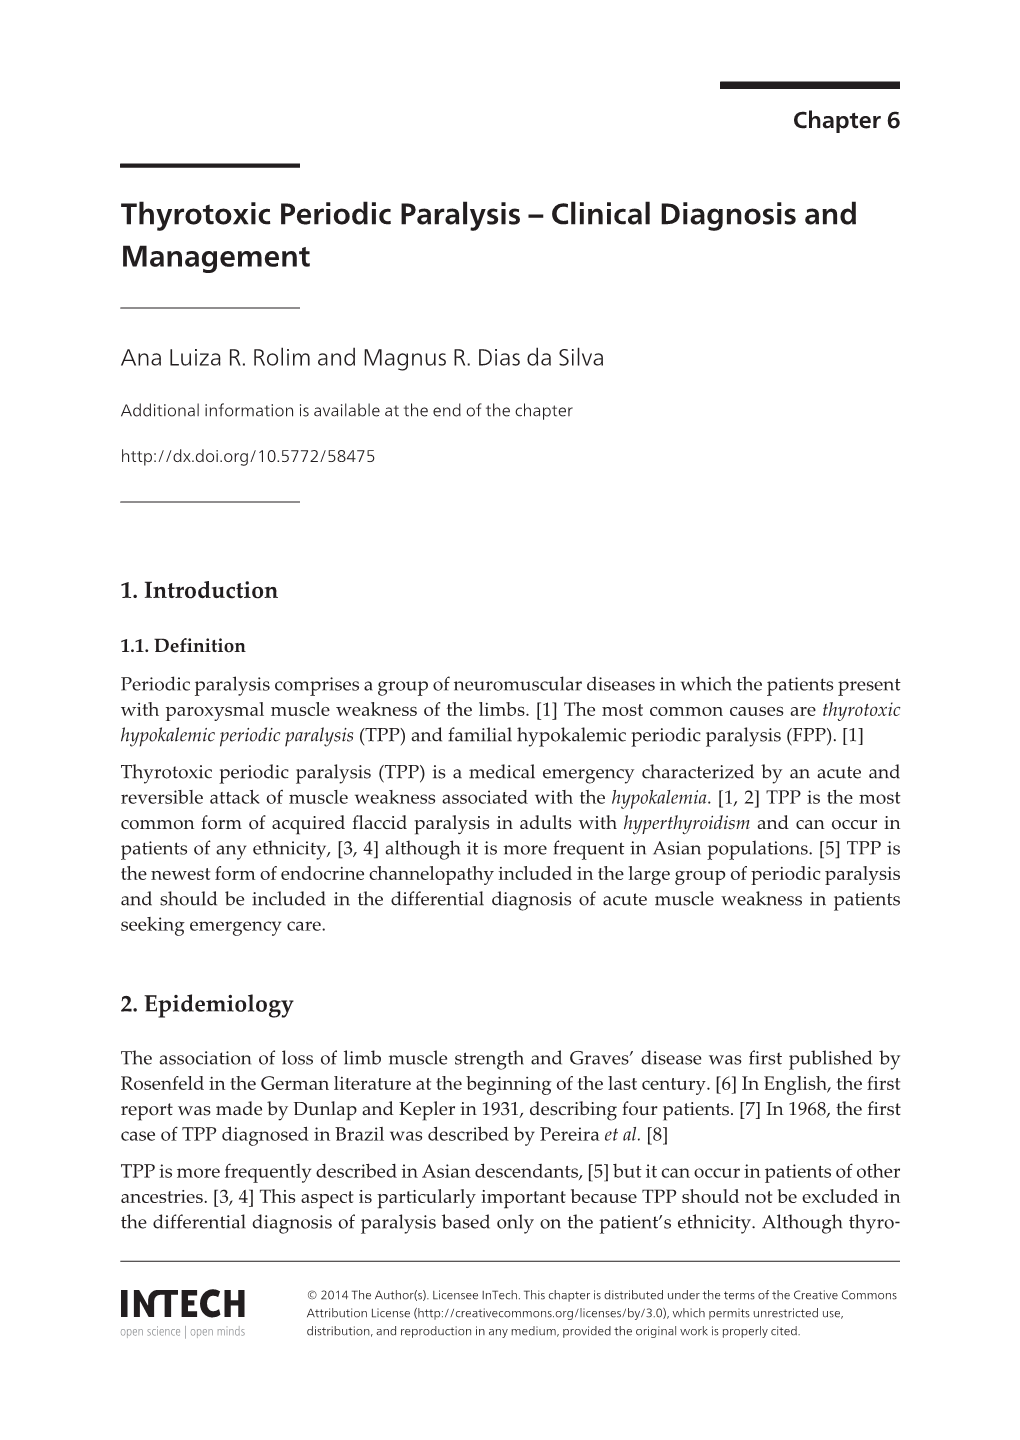 Thyrotoxic Periodic Paralysis – Clinical Diagnosis and Management